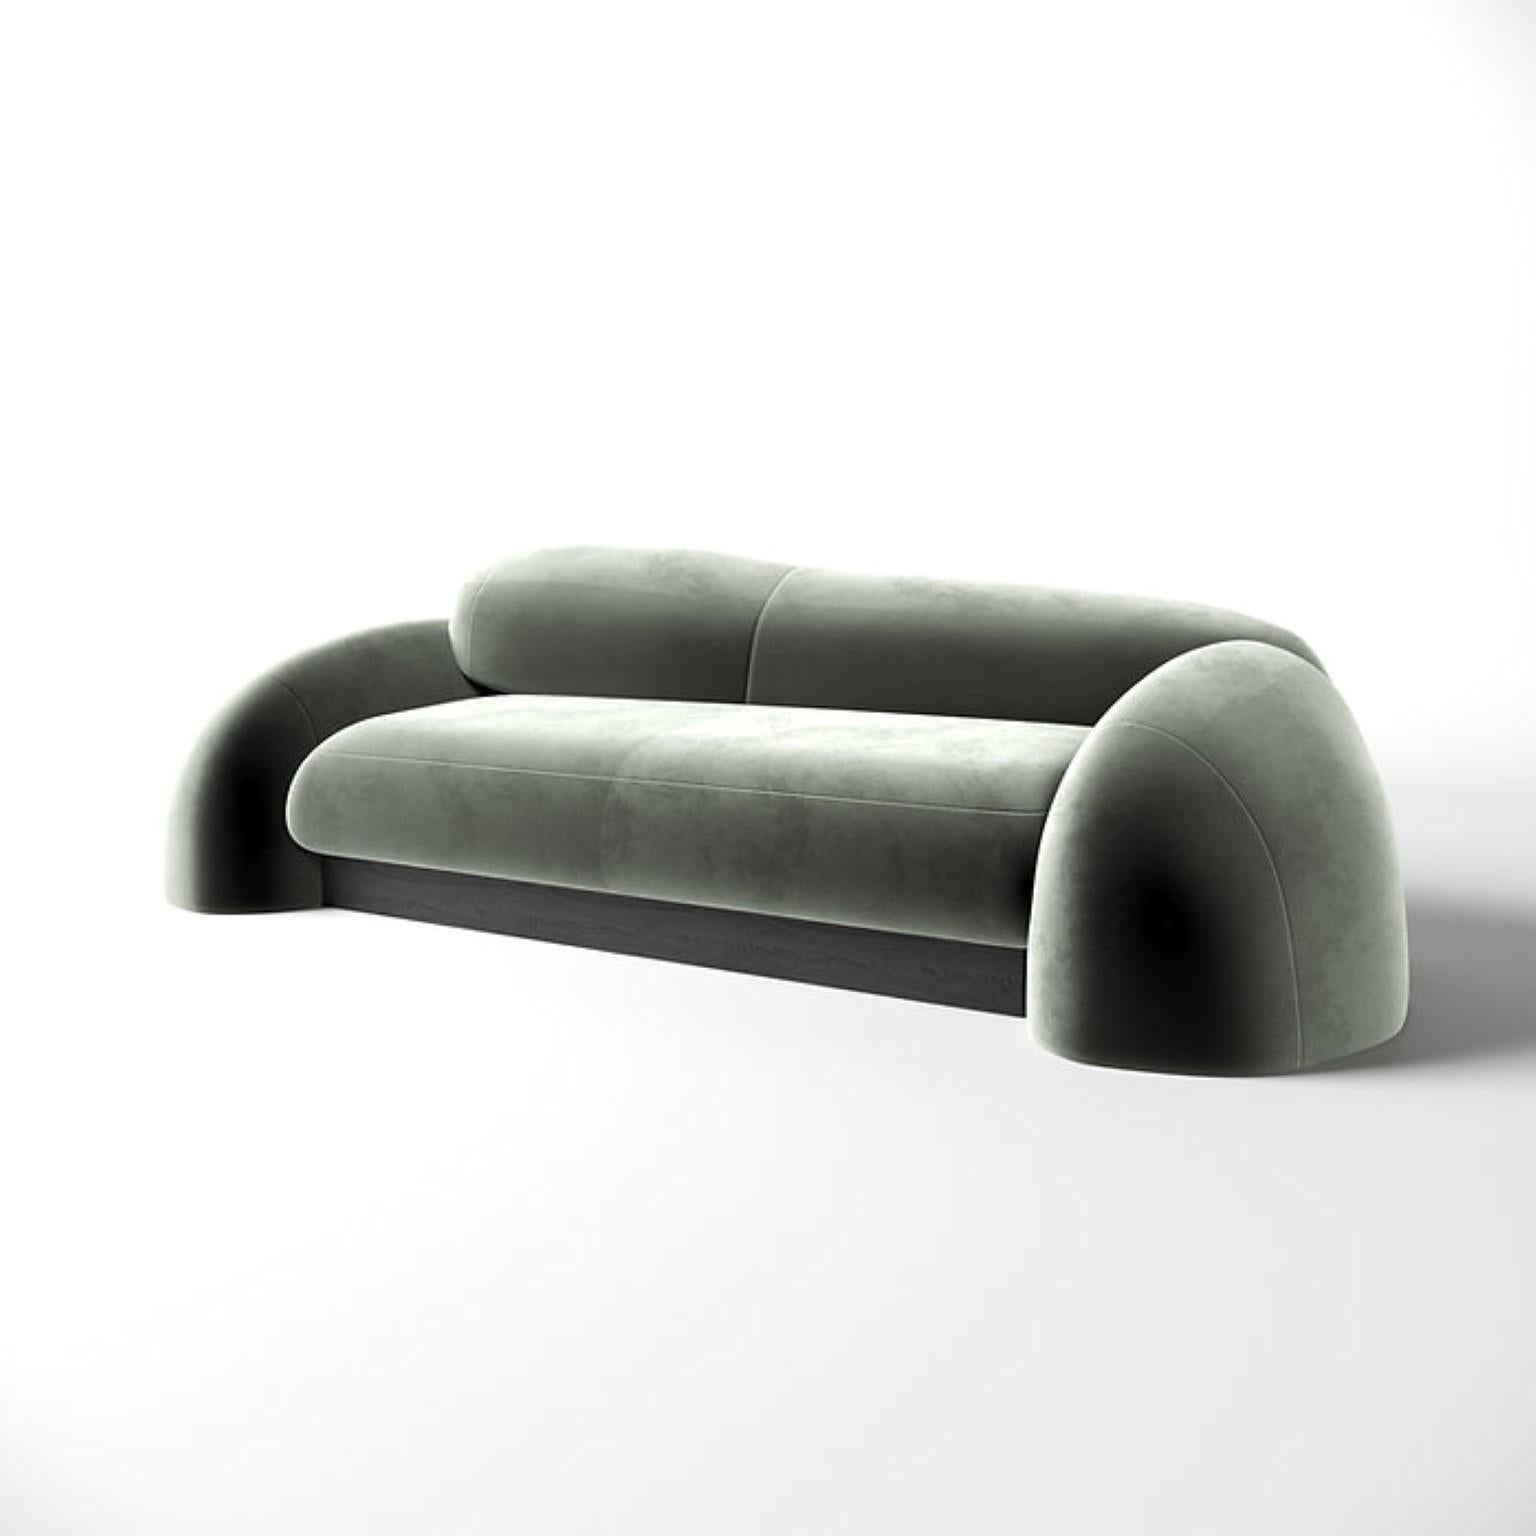 Plyn small sofa by Faina
Design: Victoriya Yakusha
Materials: Textile, foam rubber, sintepon, wood
Dimensions: W 260 x D 118 x H 80 cm

The dimensions can be customized.

Drawing inspiration from water, the PLYN small sofa embodies soft